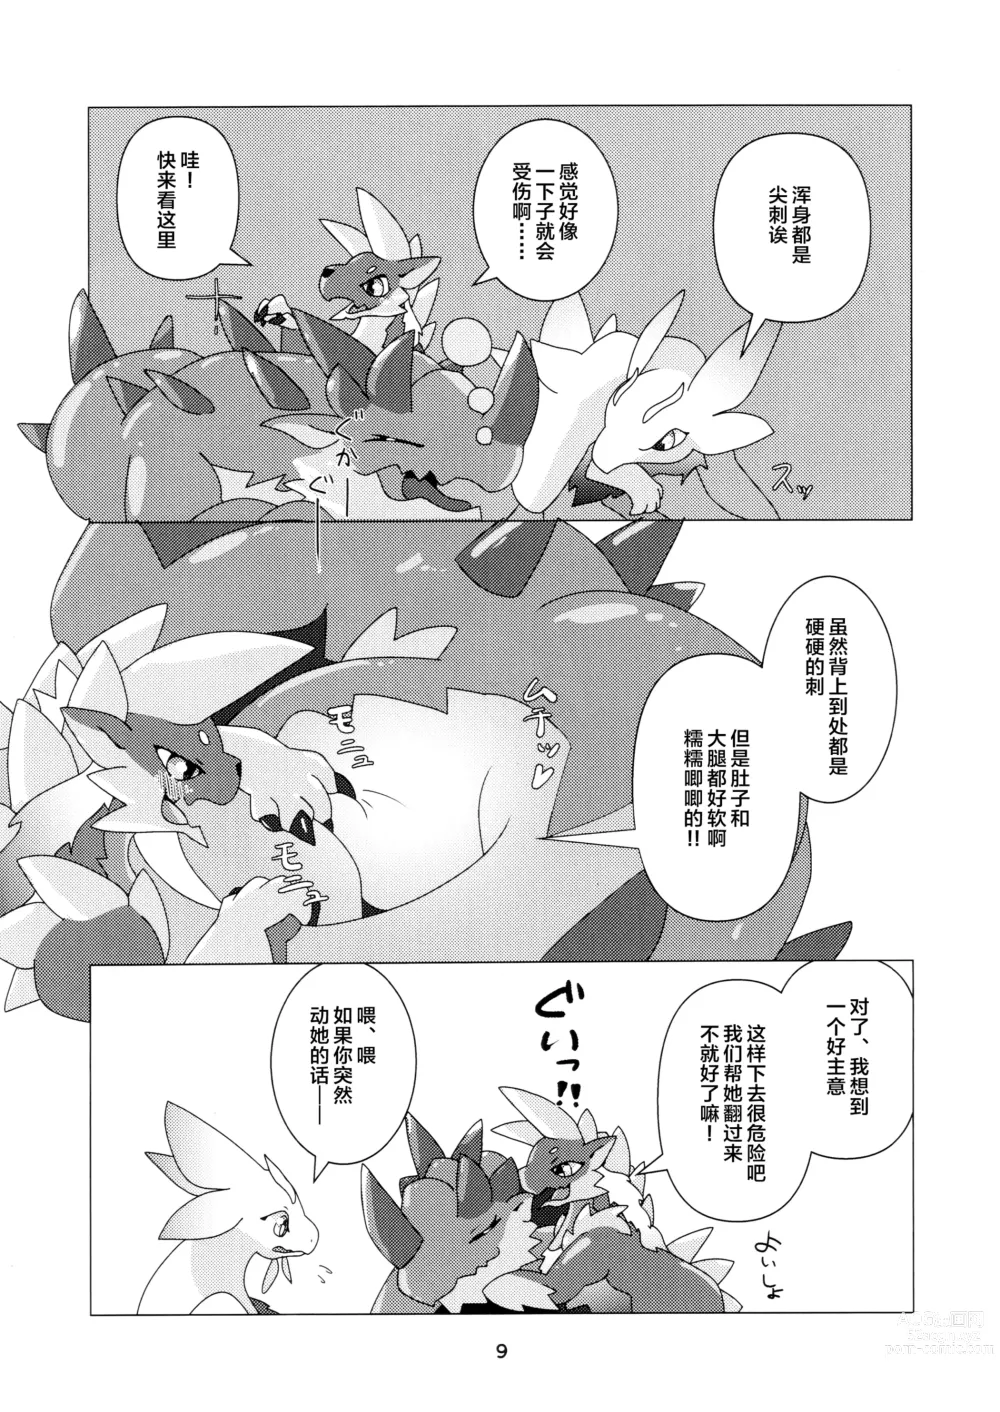 Page 8 of doujinshi 溪流的睡美人